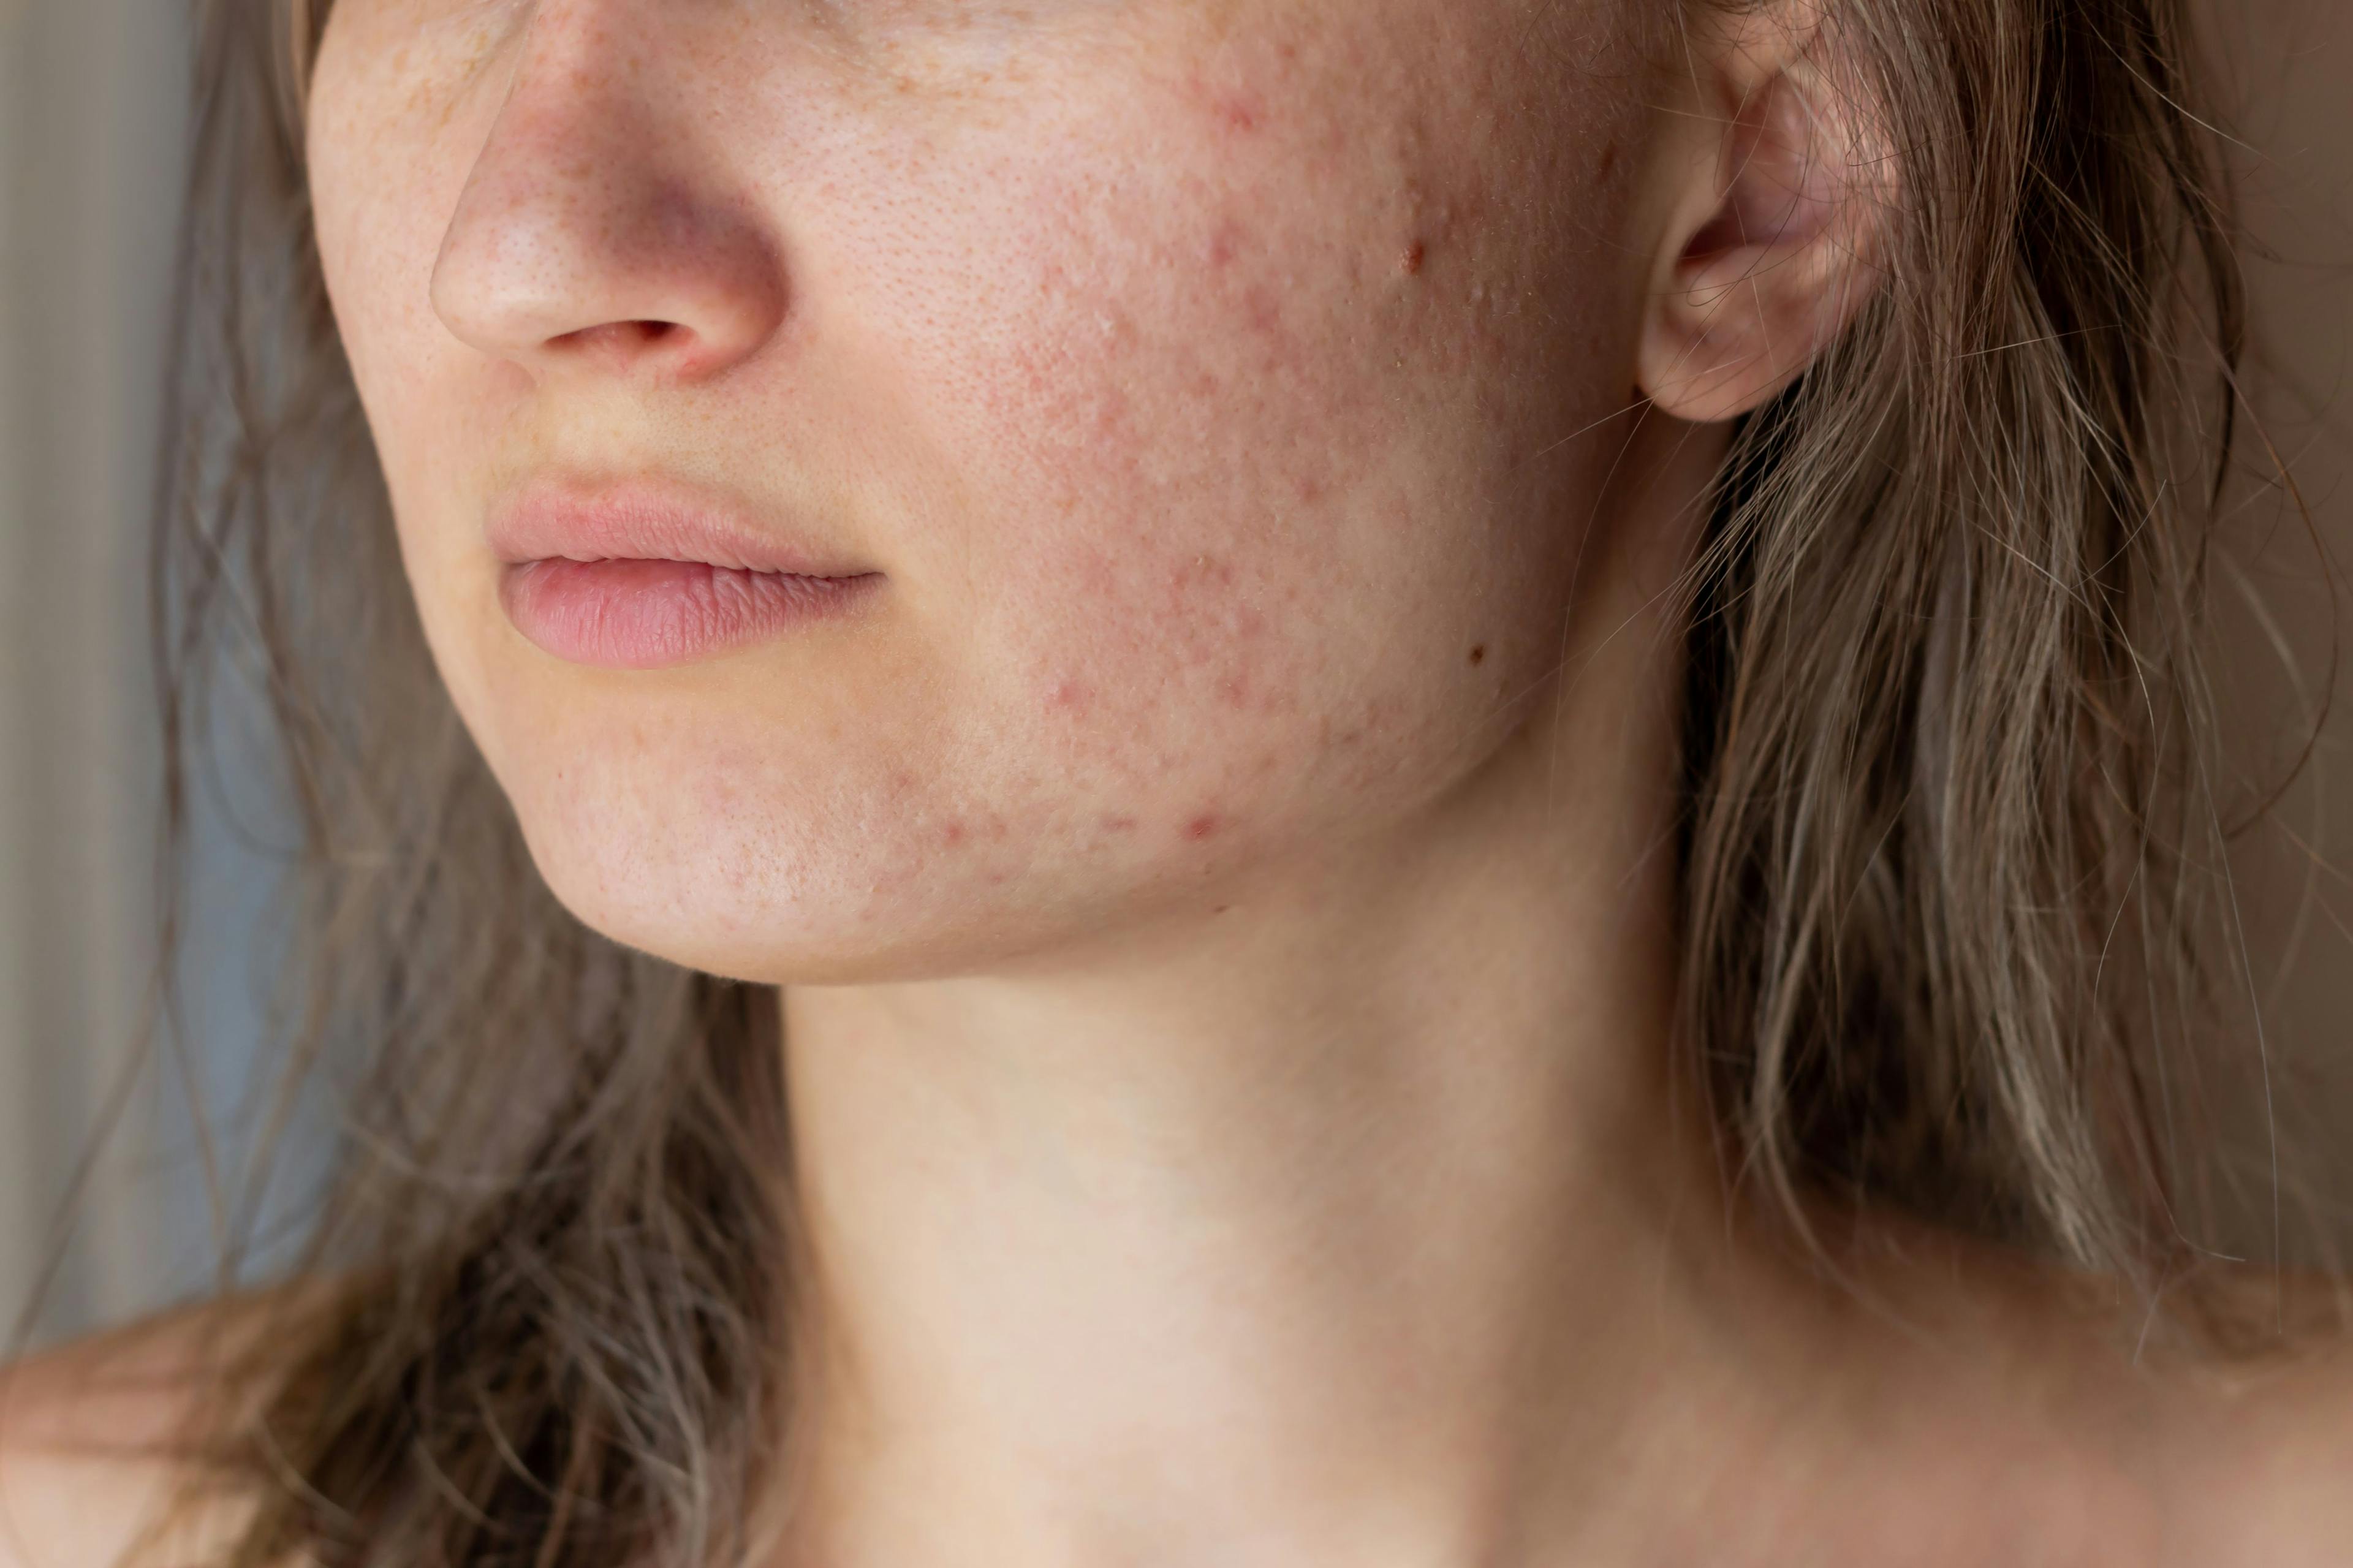 Mediterranean Diet, Omega-3 Supplements May Reduce Acne Severity 